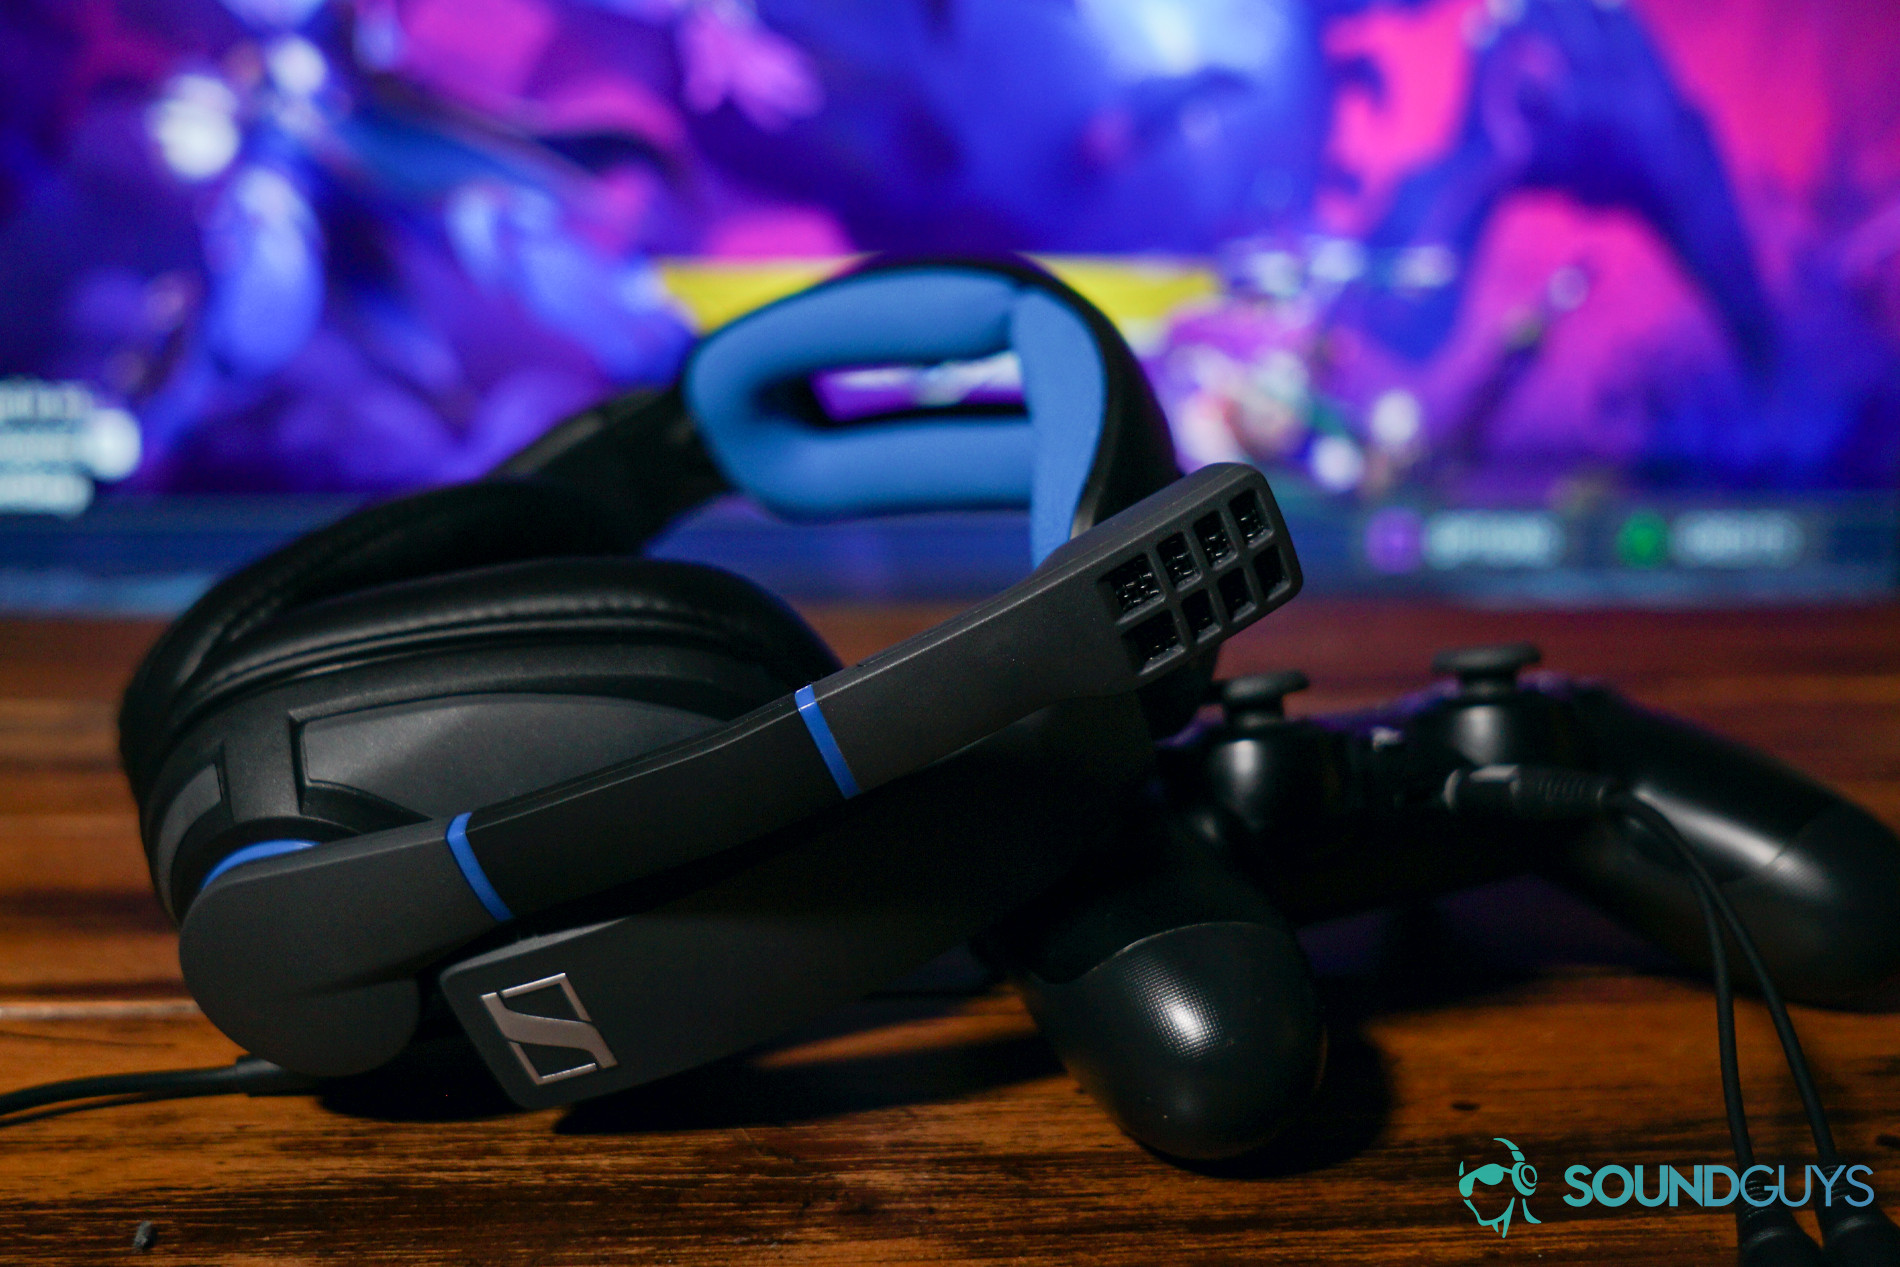 The Sennheiser GSP 300 gaming headset leans on the PlayStation 4 controller it is plugged into, with a Dauntless on Playstation 4 running on a TV in the background.